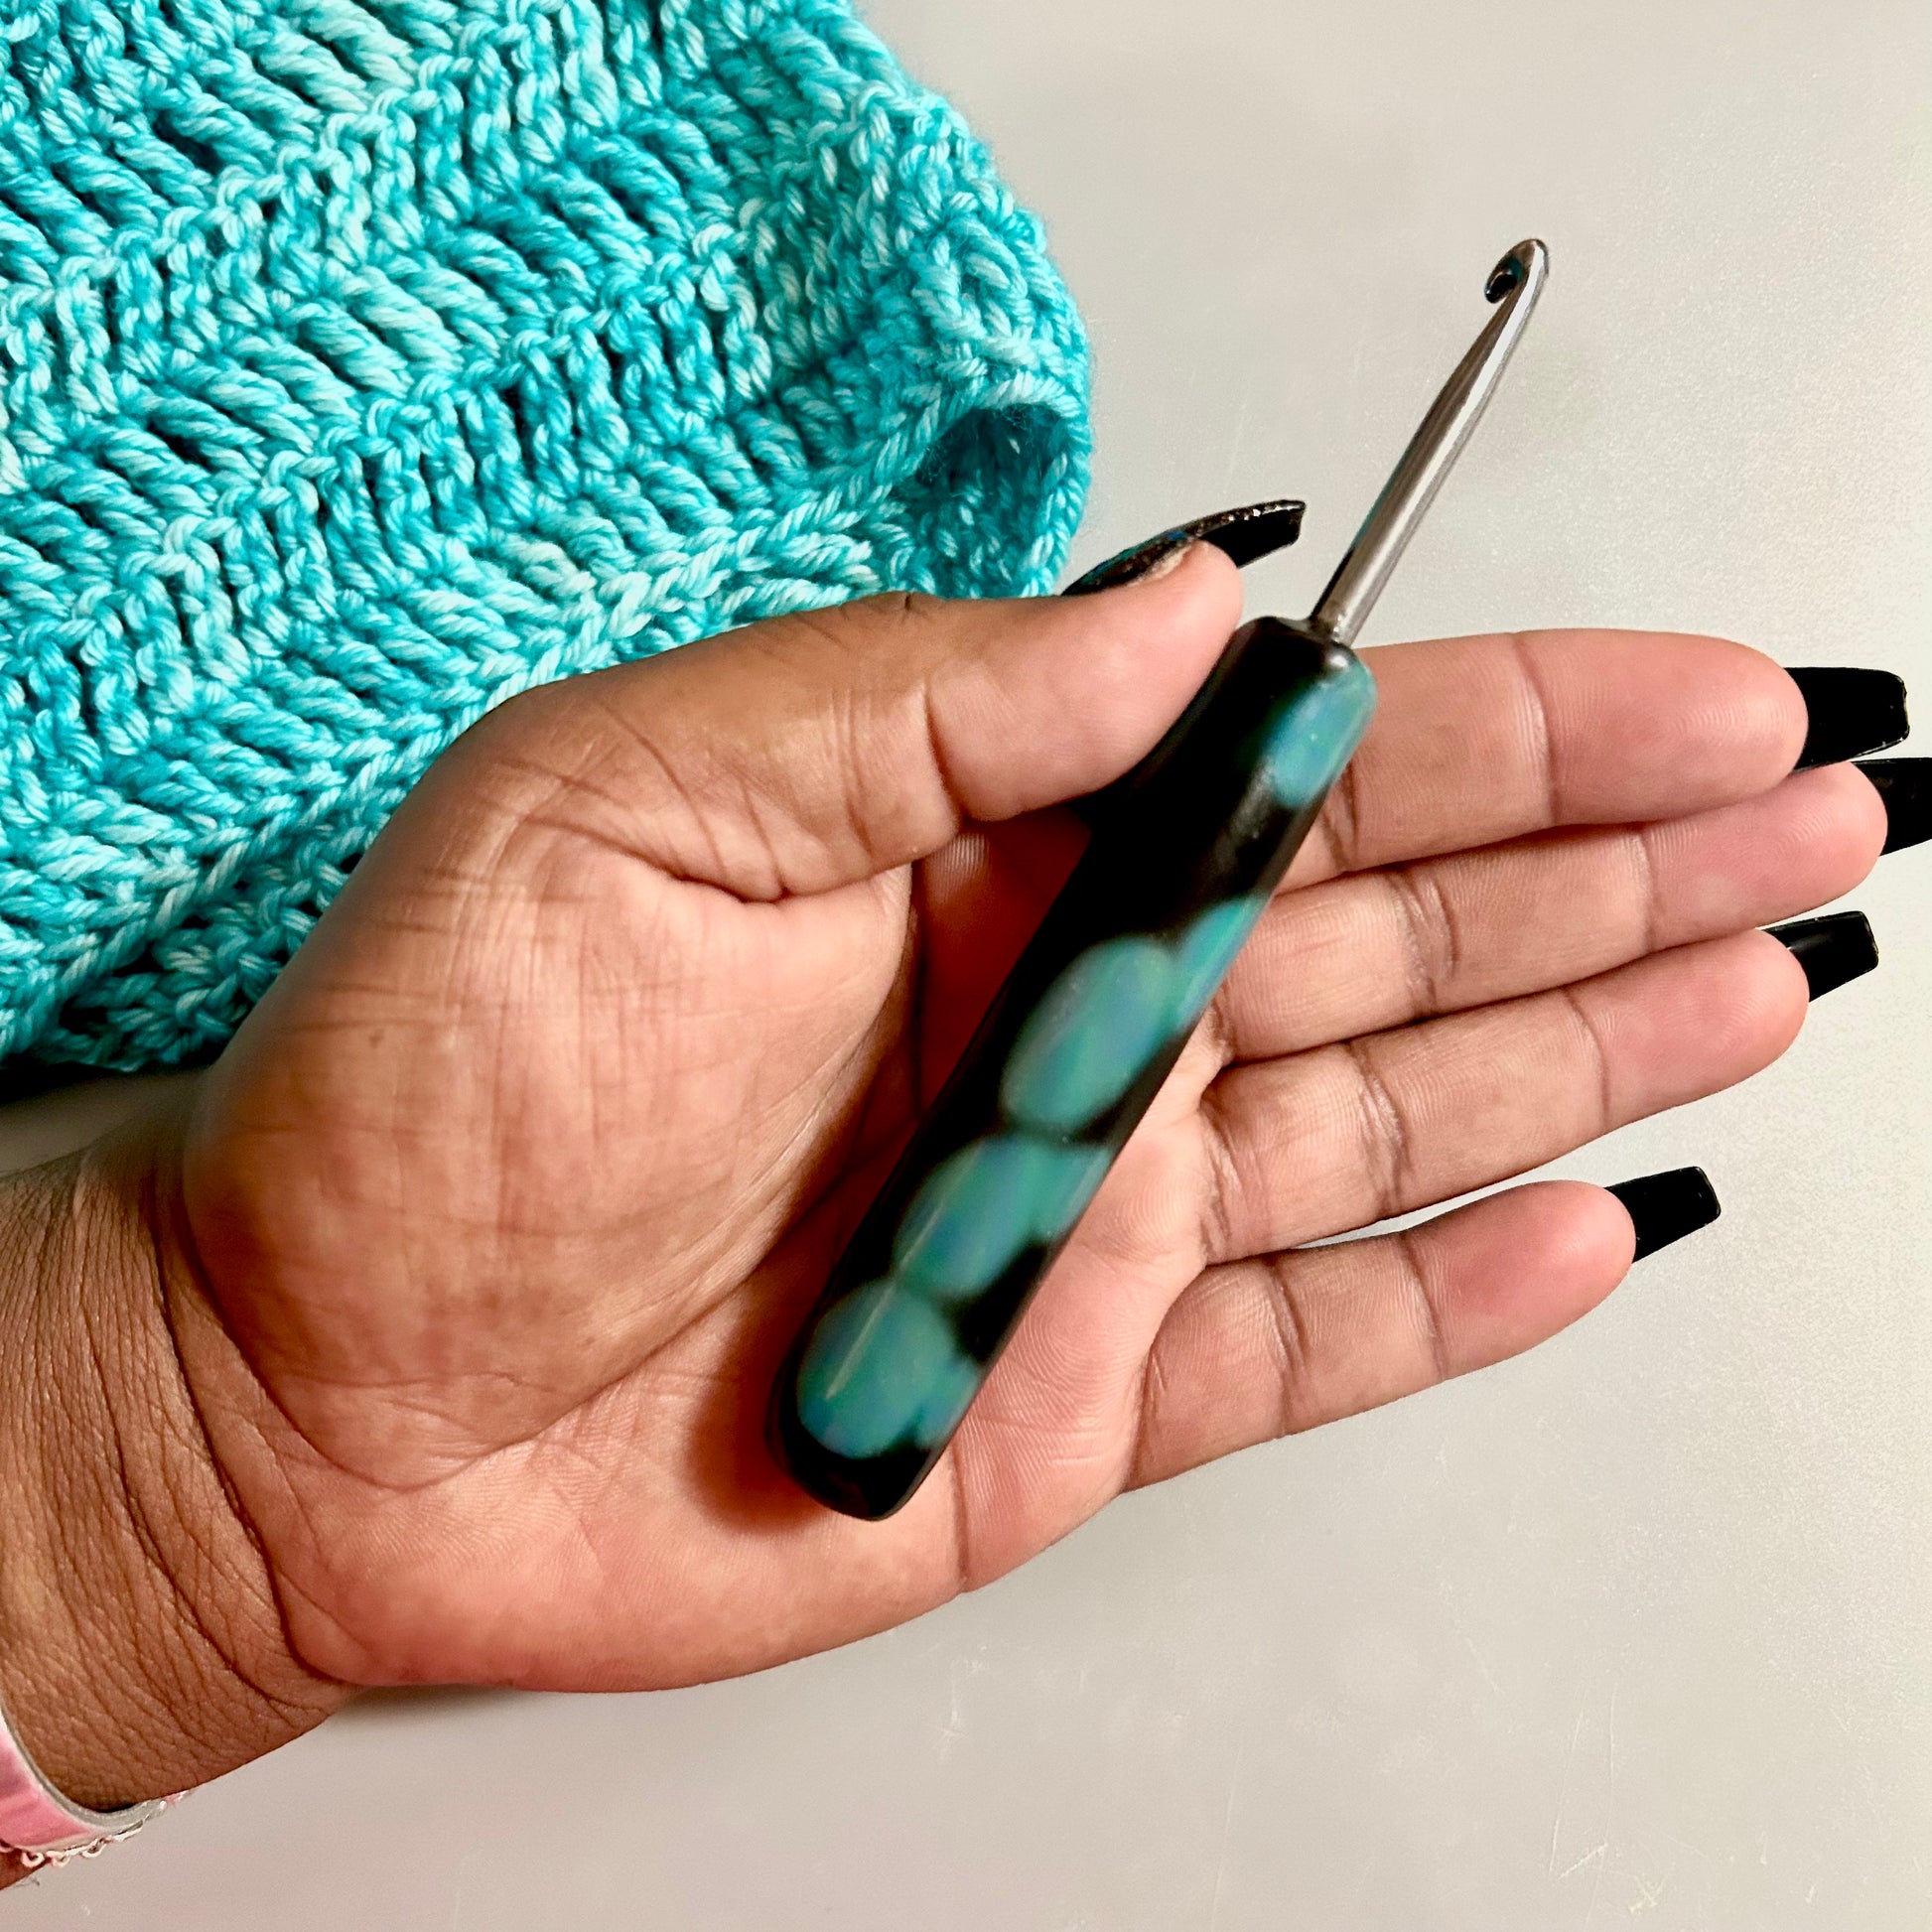 Your Choice of Color and Size Bates Floral Extra Long Length Hook – Happy  Polymer Crochet Hooks